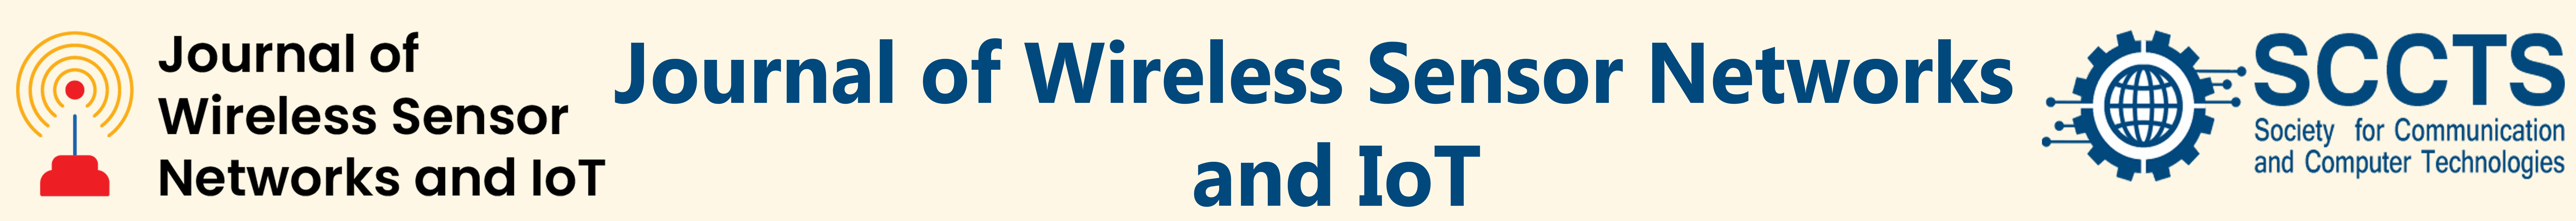 Journal of Wireless Sensor Networks and IoT